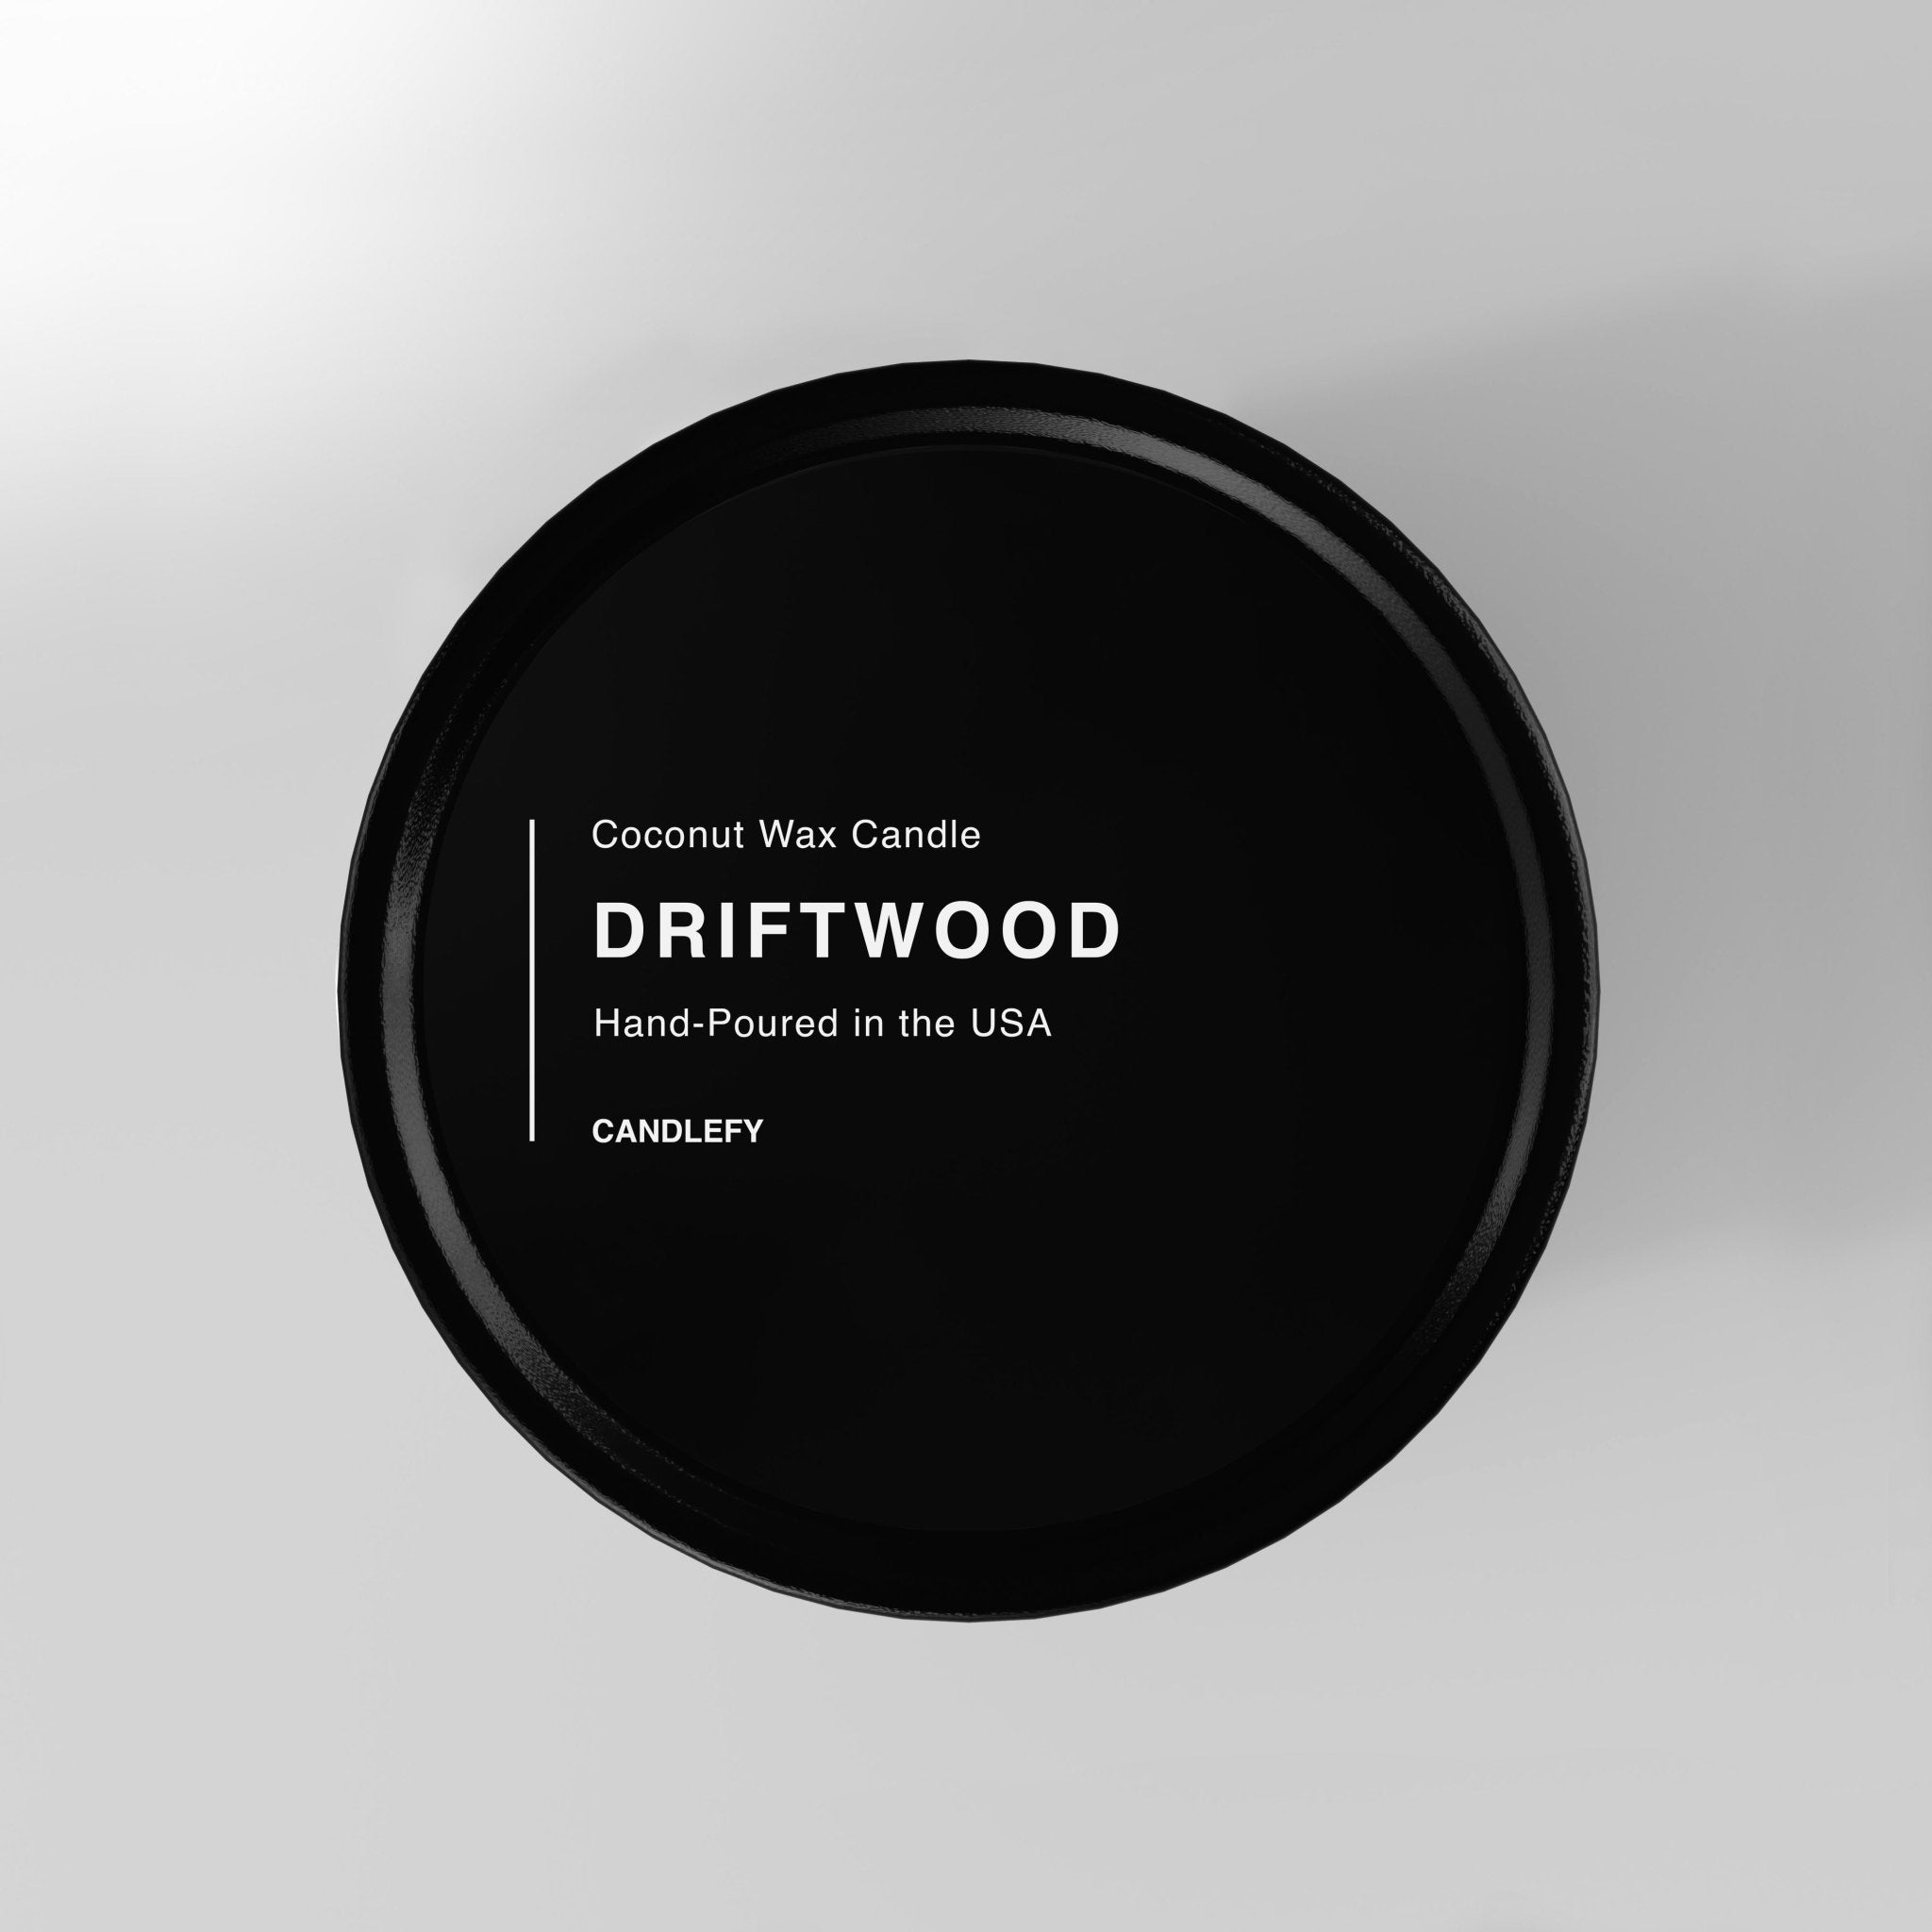 Driftwood Natural Wax Scented Candle in Black Travel Tin - Candlefy